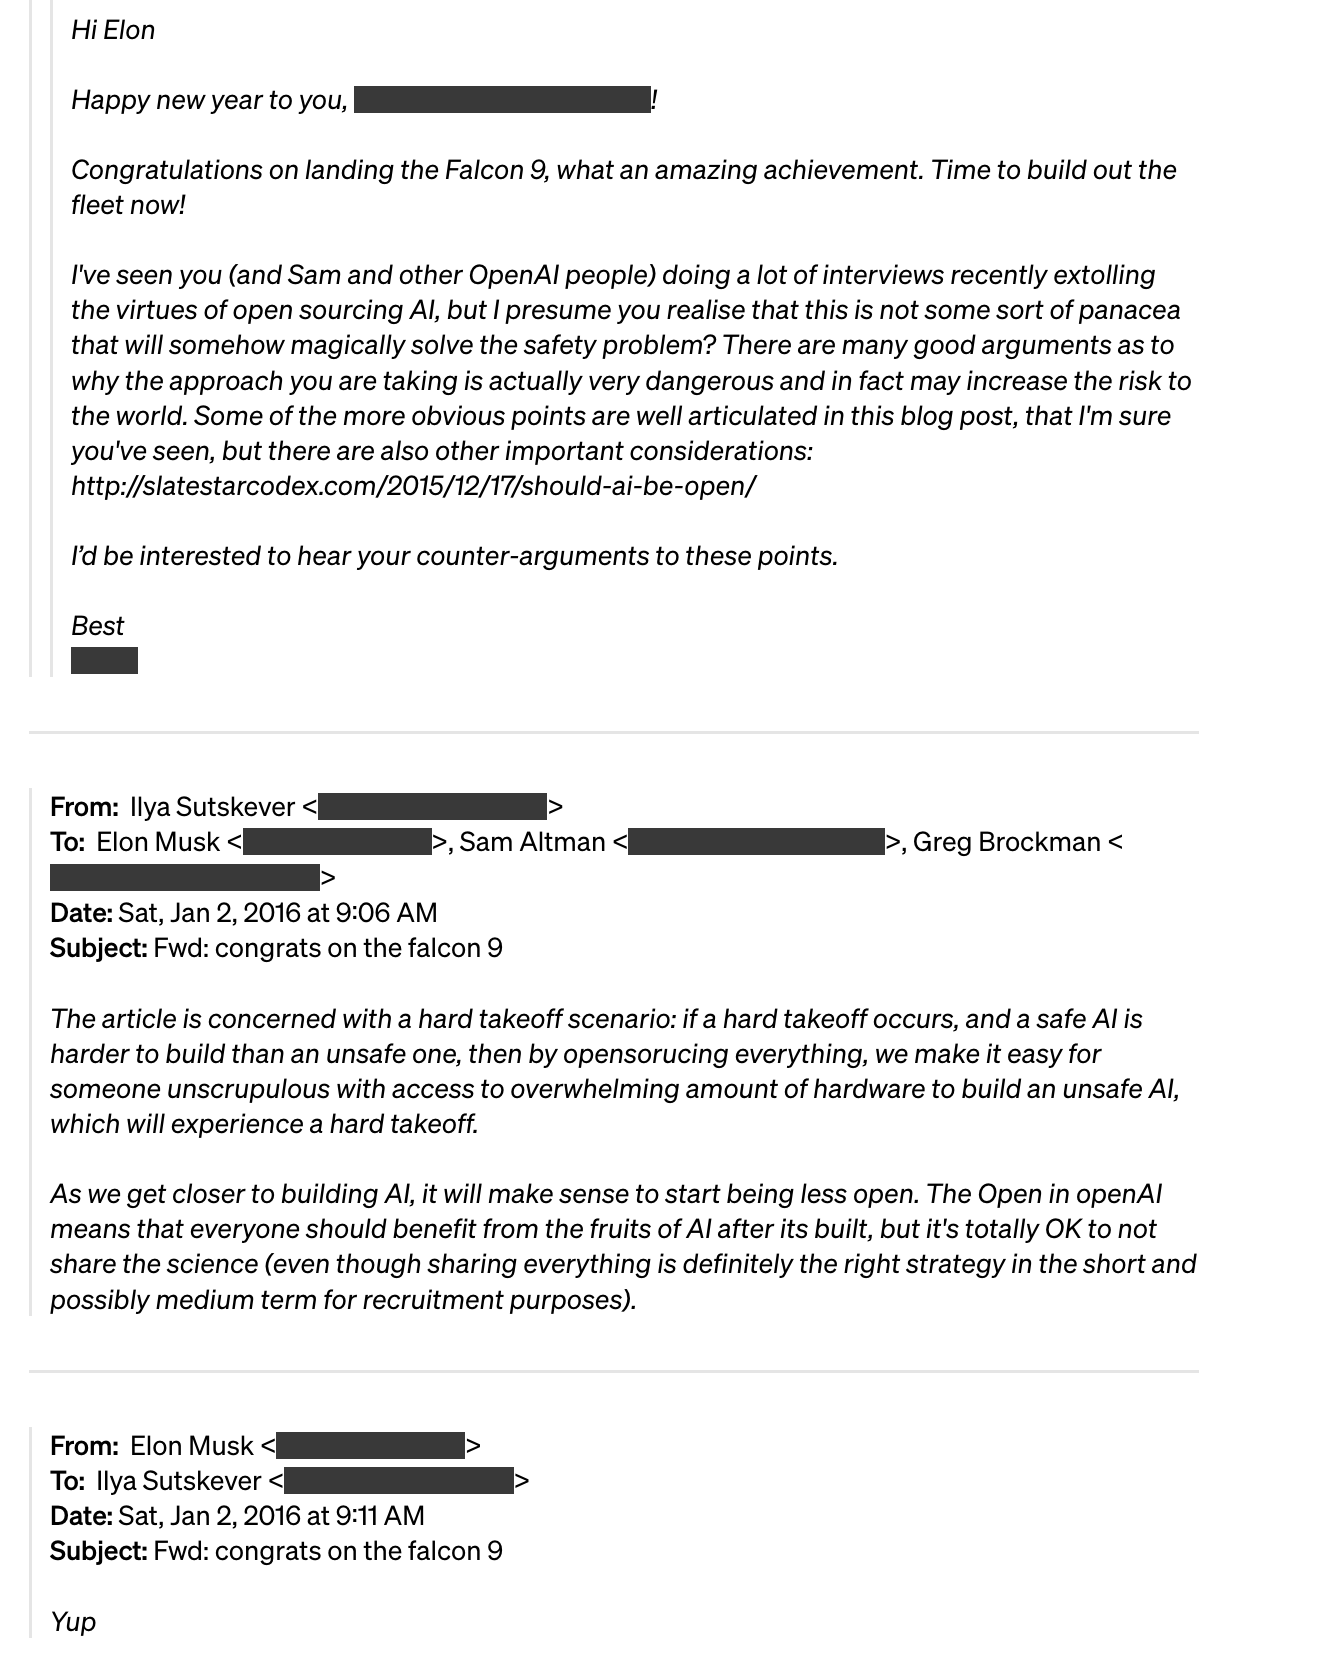 The emails between OPENAI and ELon musk